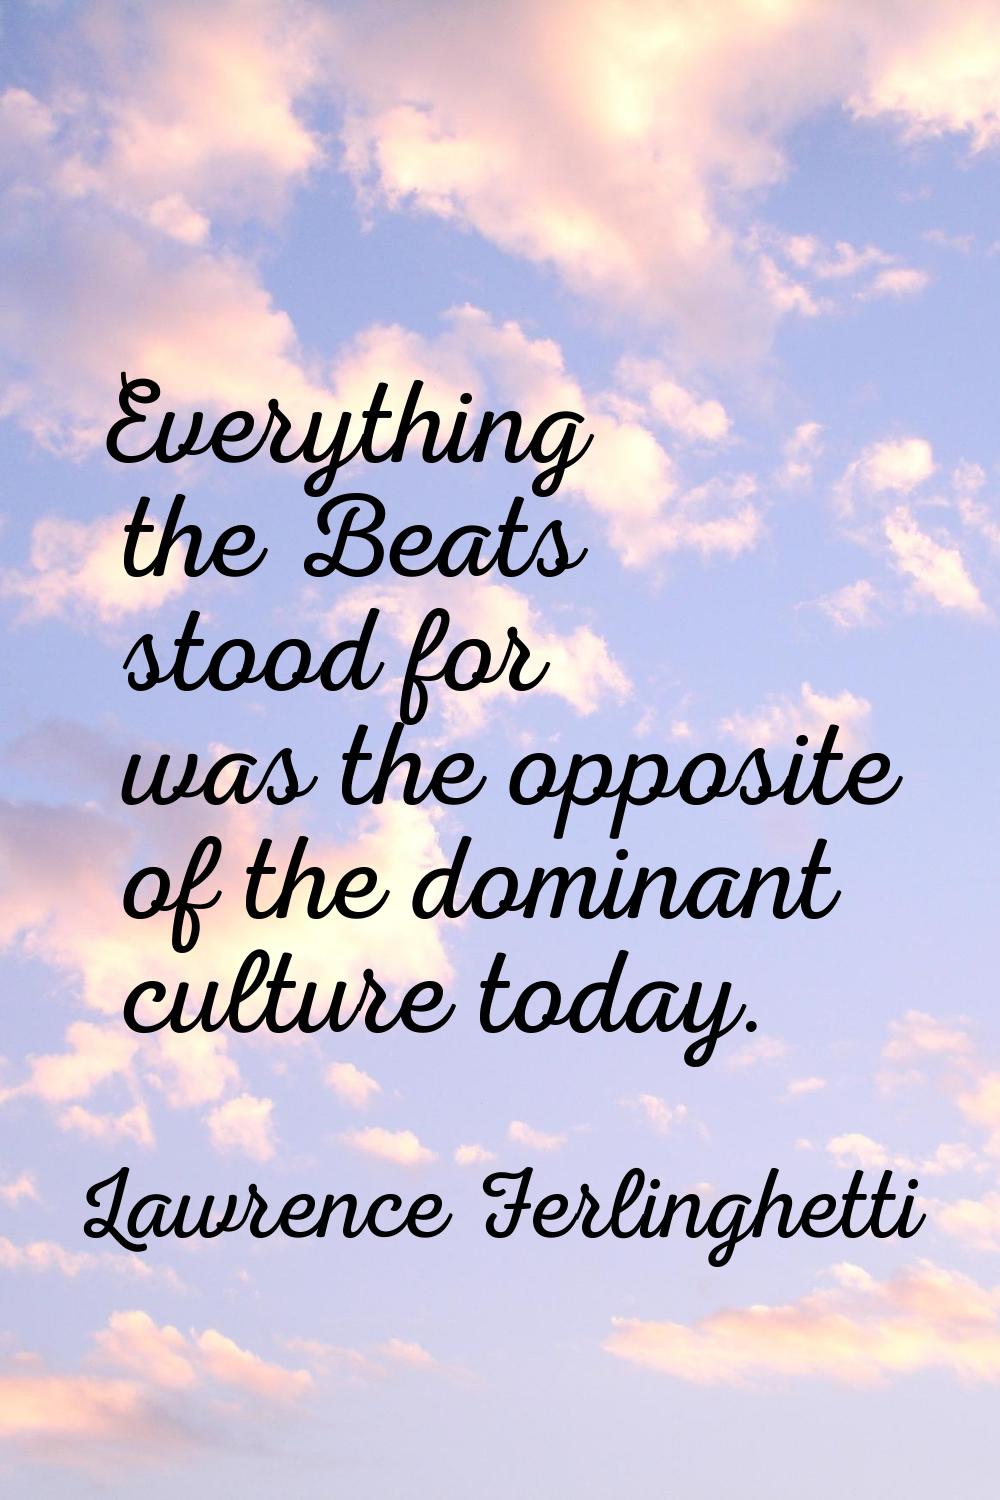 Everything the Beats stood for was the opposite of the dominant culture today.